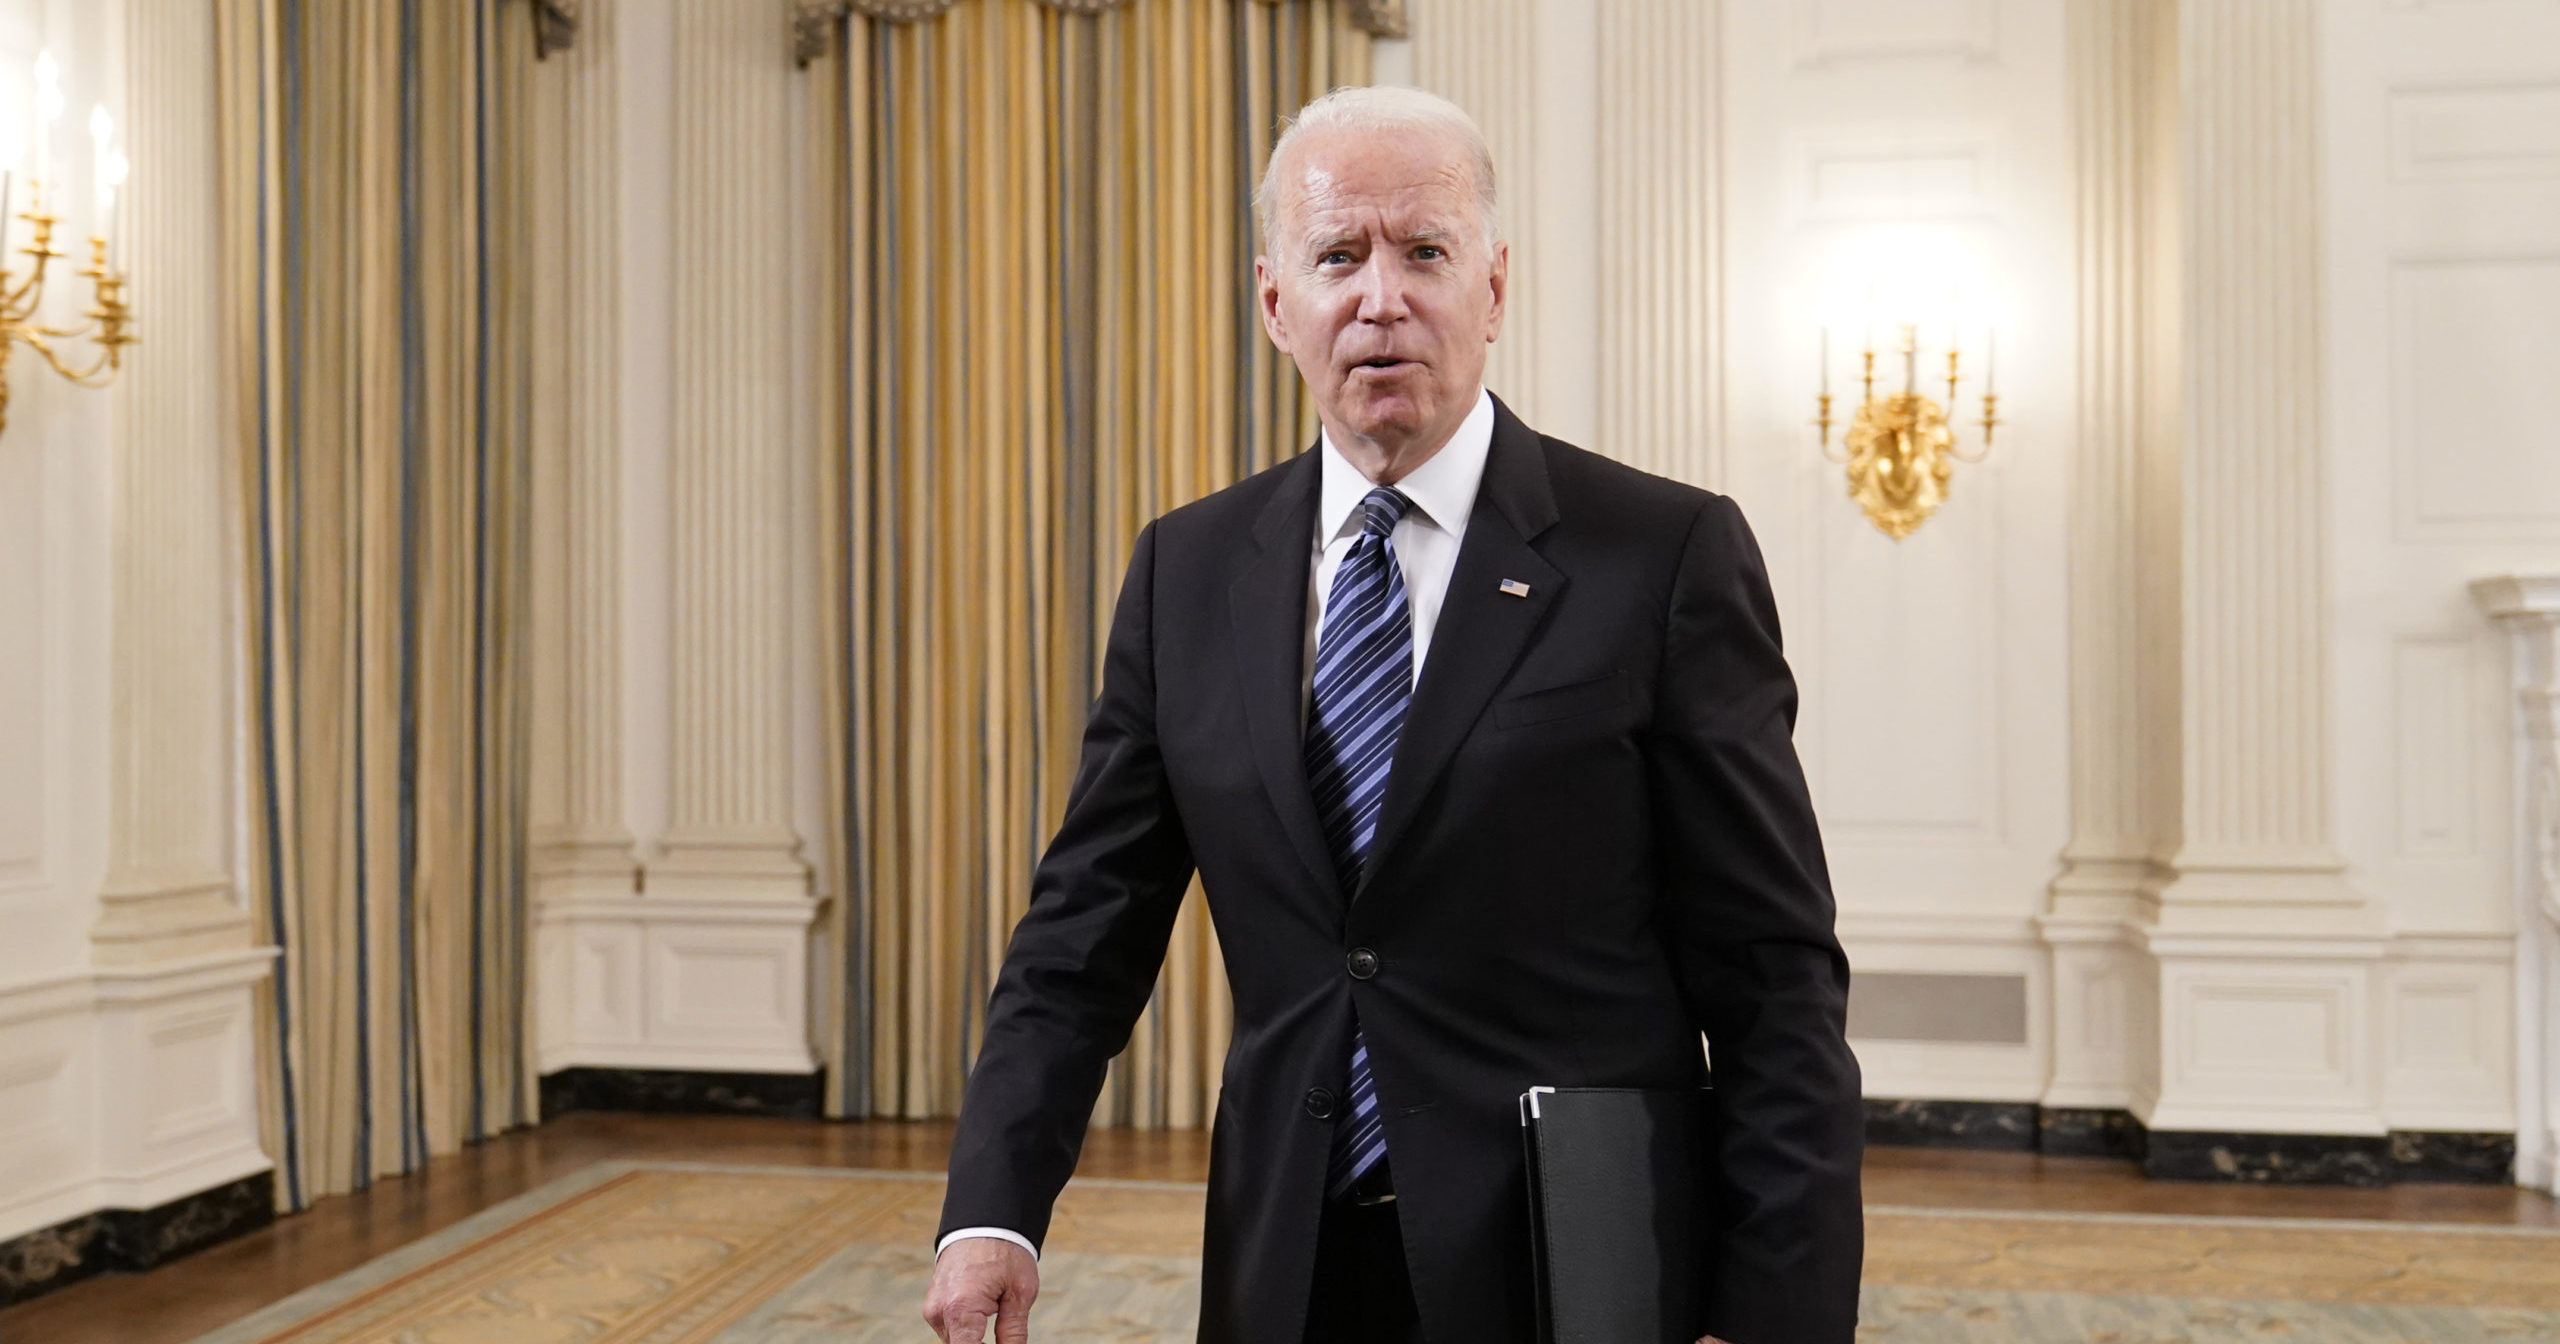 President Joe Biden leaves after an event at the White House in Washington, D.C., on Wednesday.